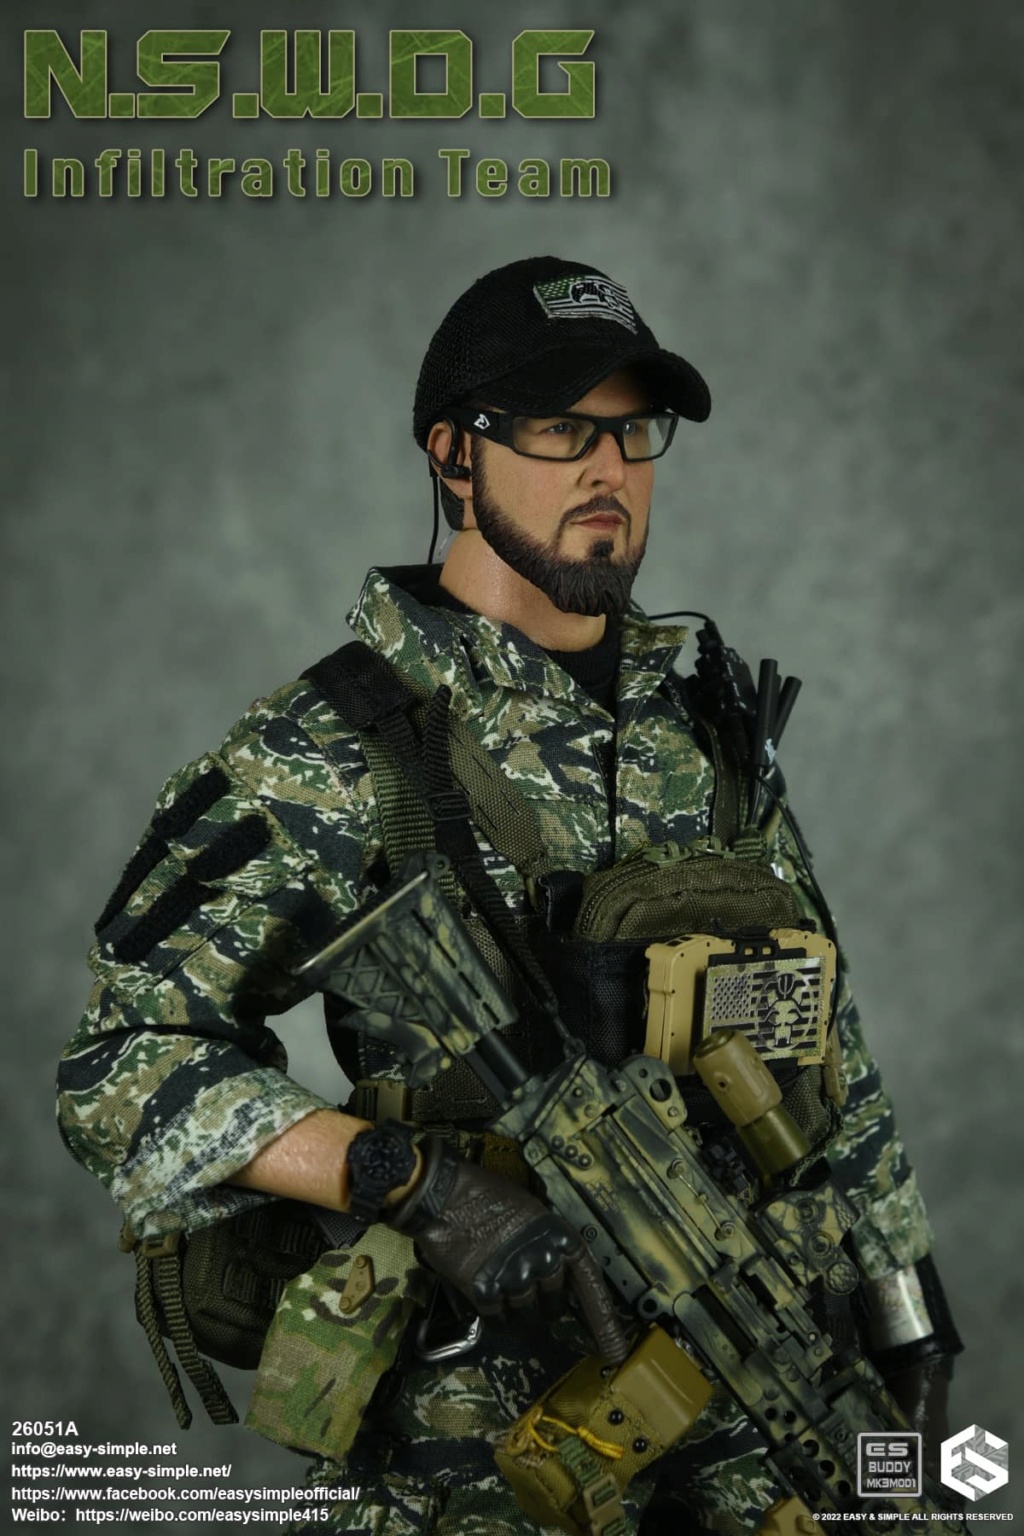 InfilitrationTeam - NEW PRODUCT: EASY AND SIMPLE 1/6 SCALE FIGURE: N.S.W.D.G INFILTRATION TEAM - (2 Versions) 19268